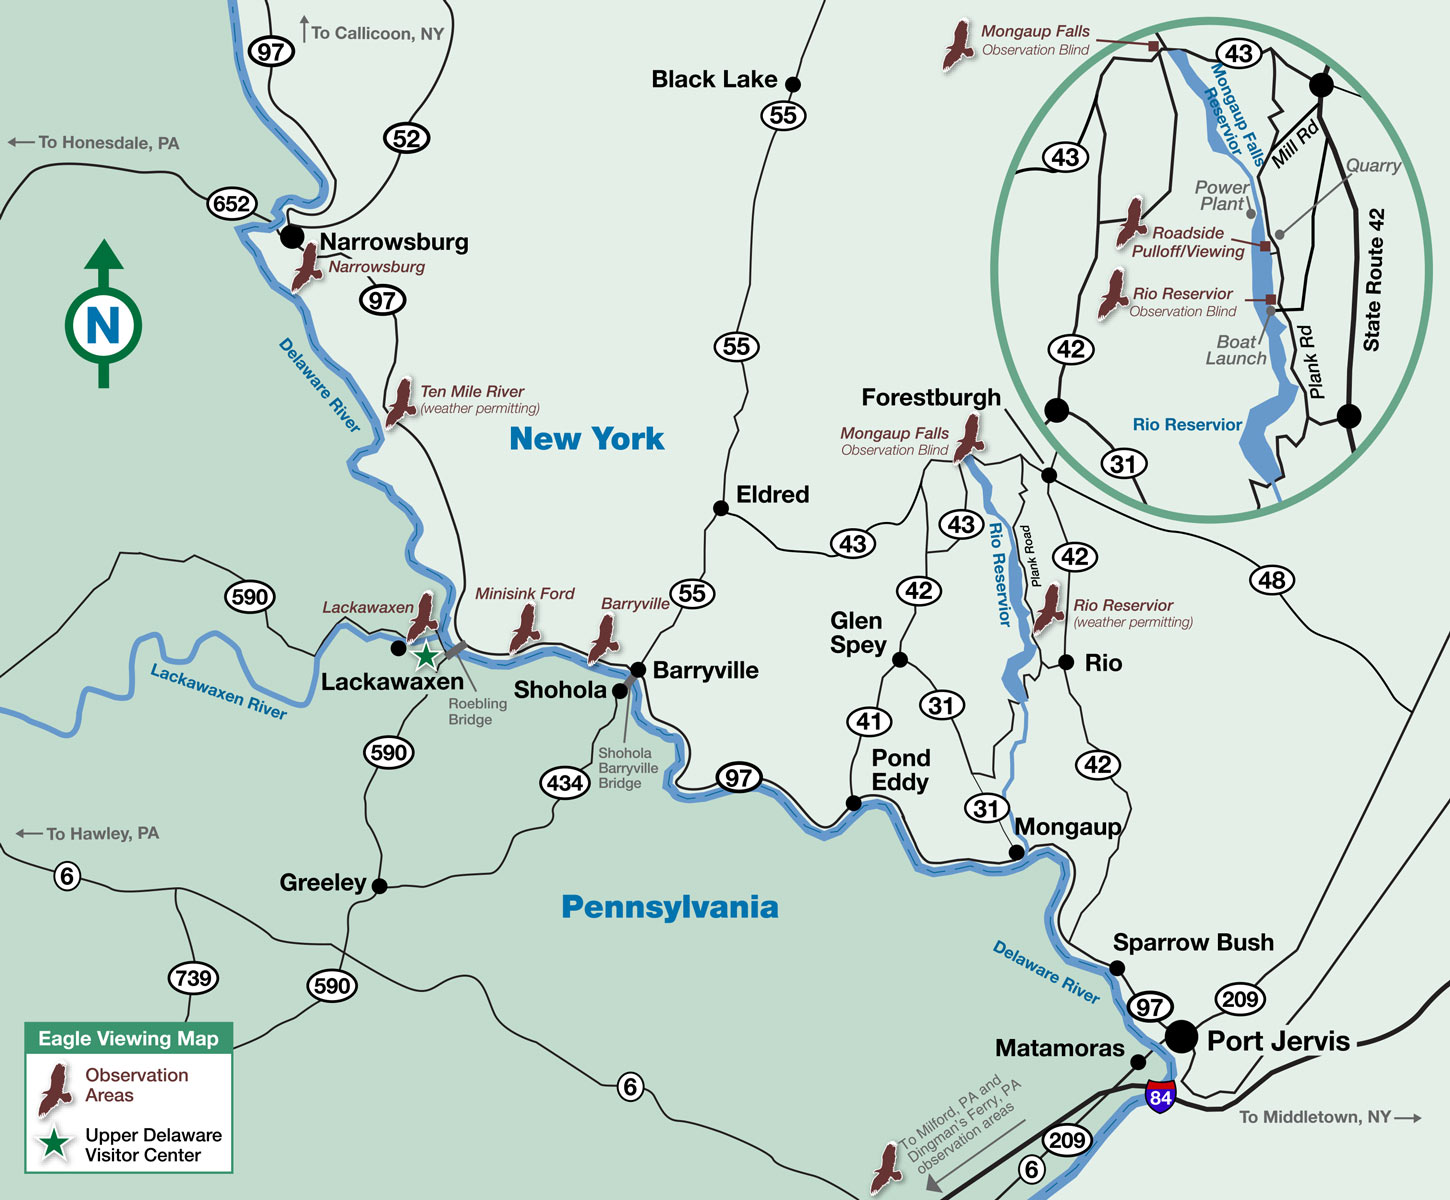 Map of Upper Delaware River region eagle viewing locations